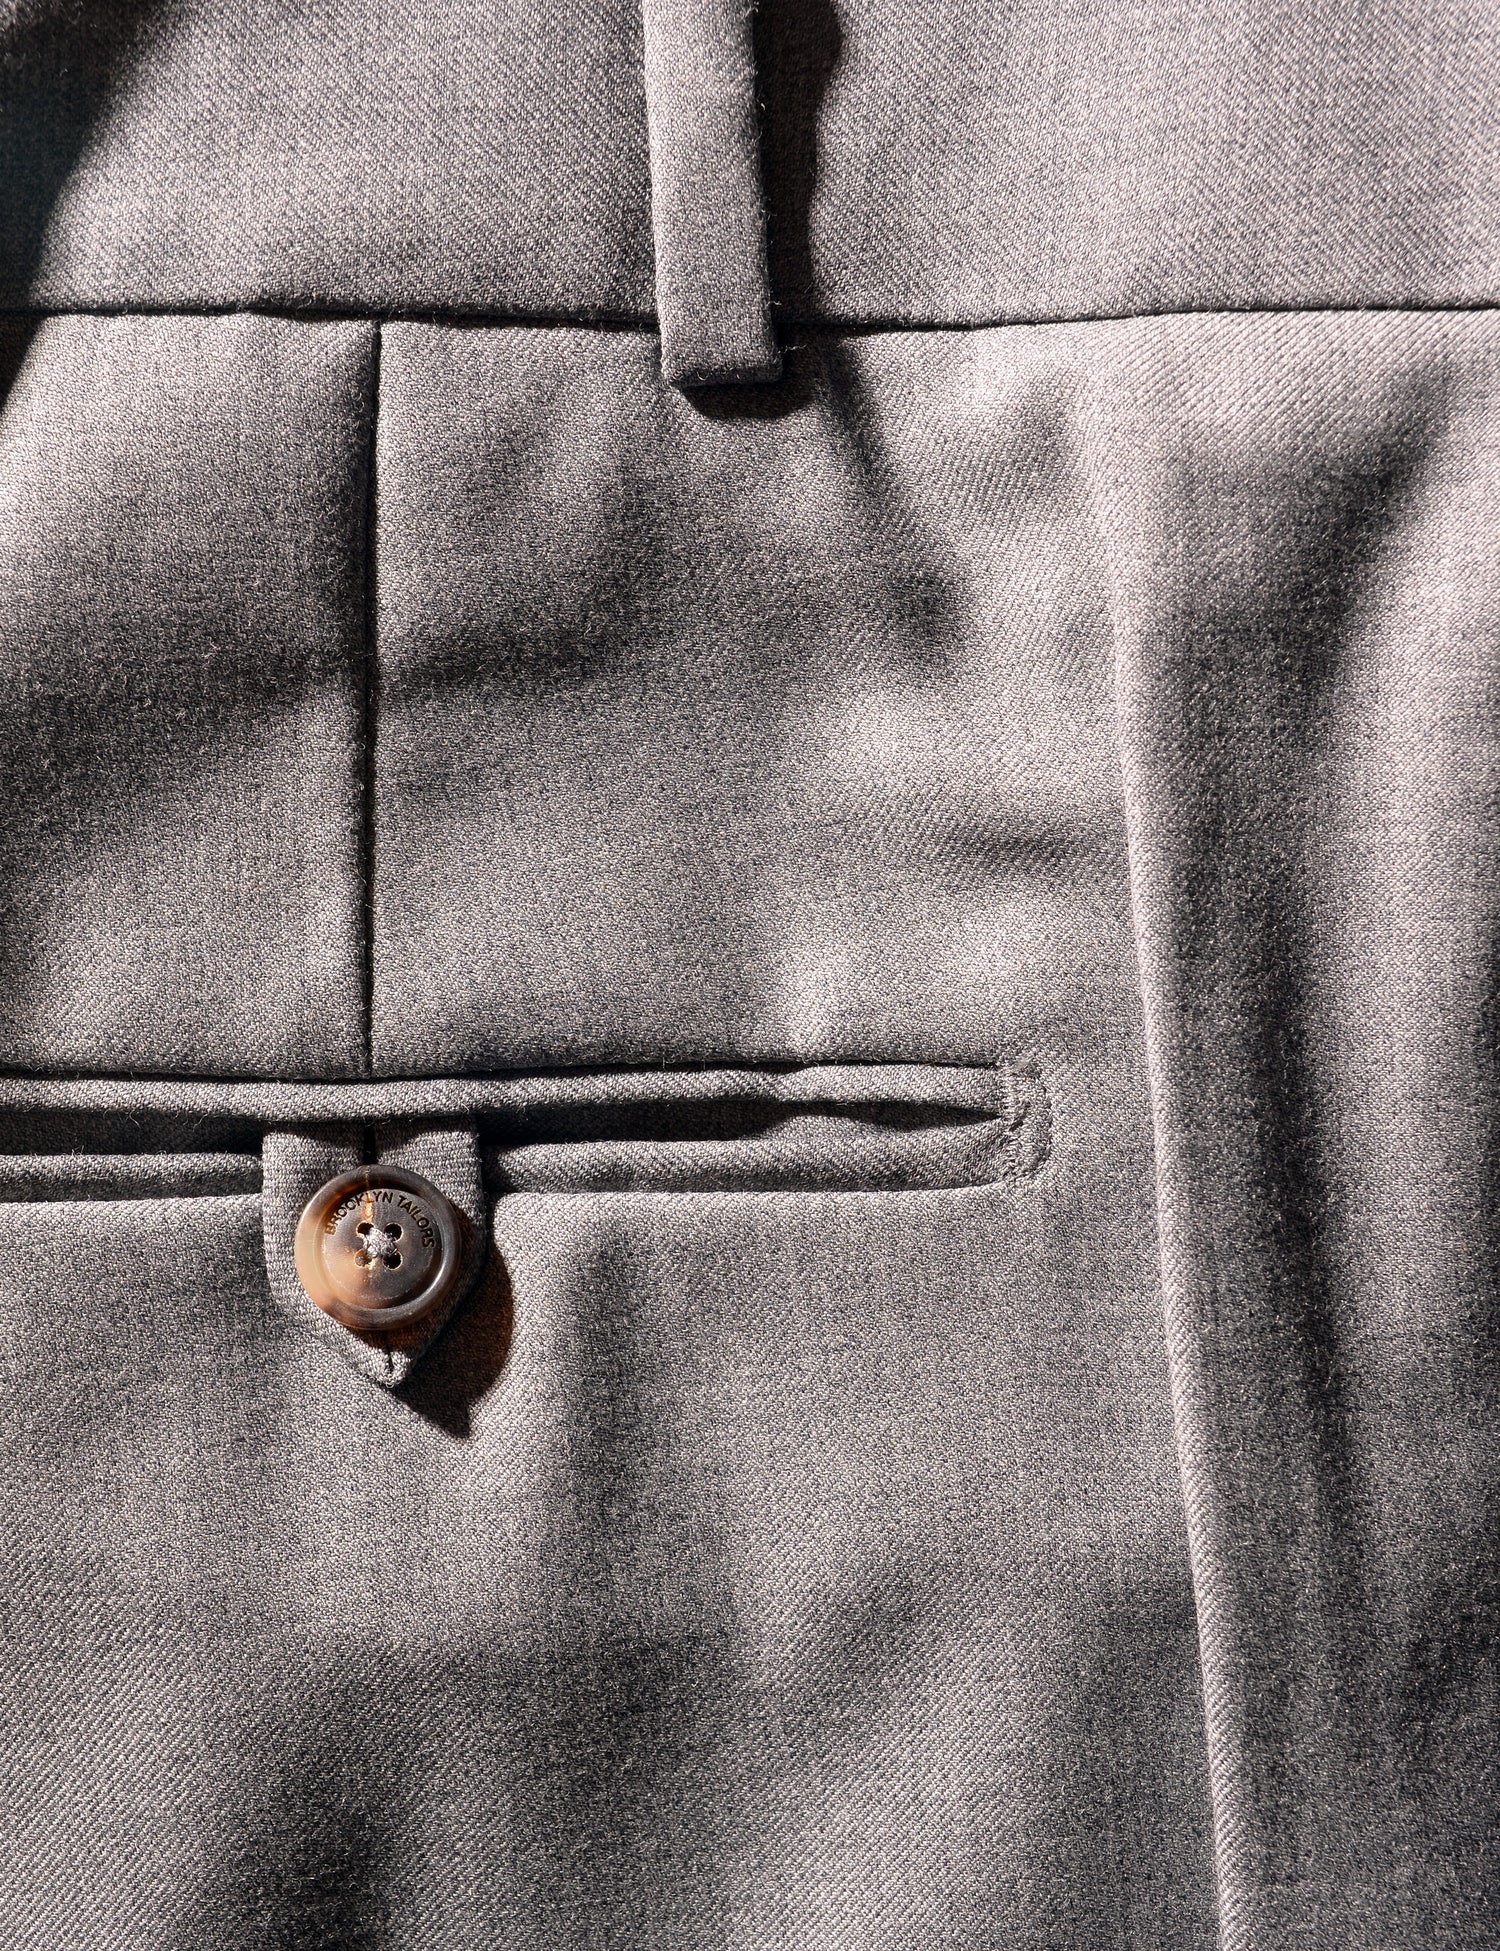 Detail shot of Brooklyn Tailors BKT50 Tailored Trouser in Super 110s Twill - Dove Gray showing back pocket and waistband